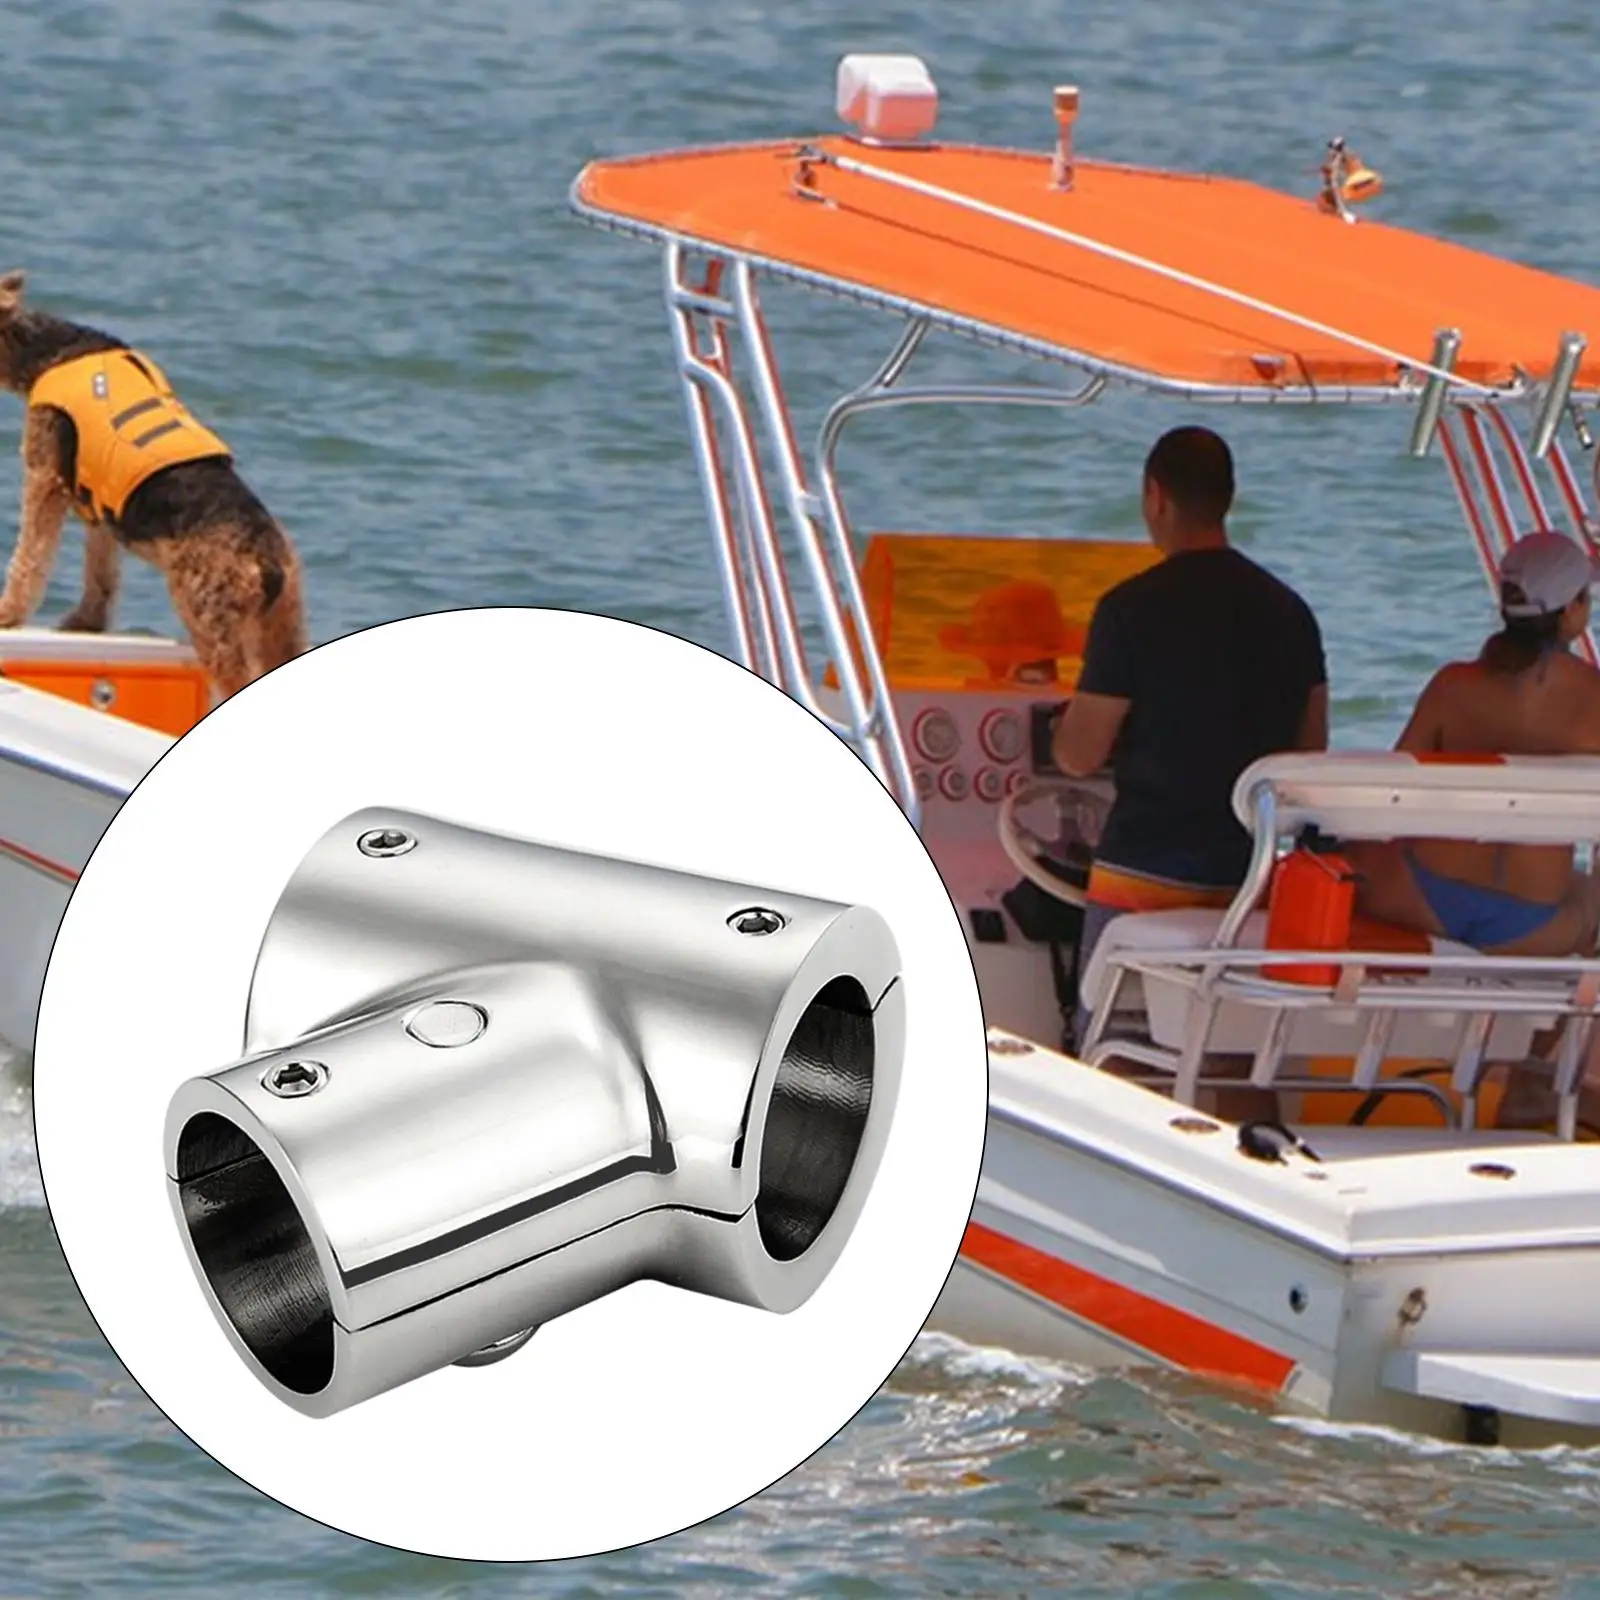 Boat Hardware, Boat Hand Rail Fitting, Boat Railing Pipe, Boat Tee Connector for